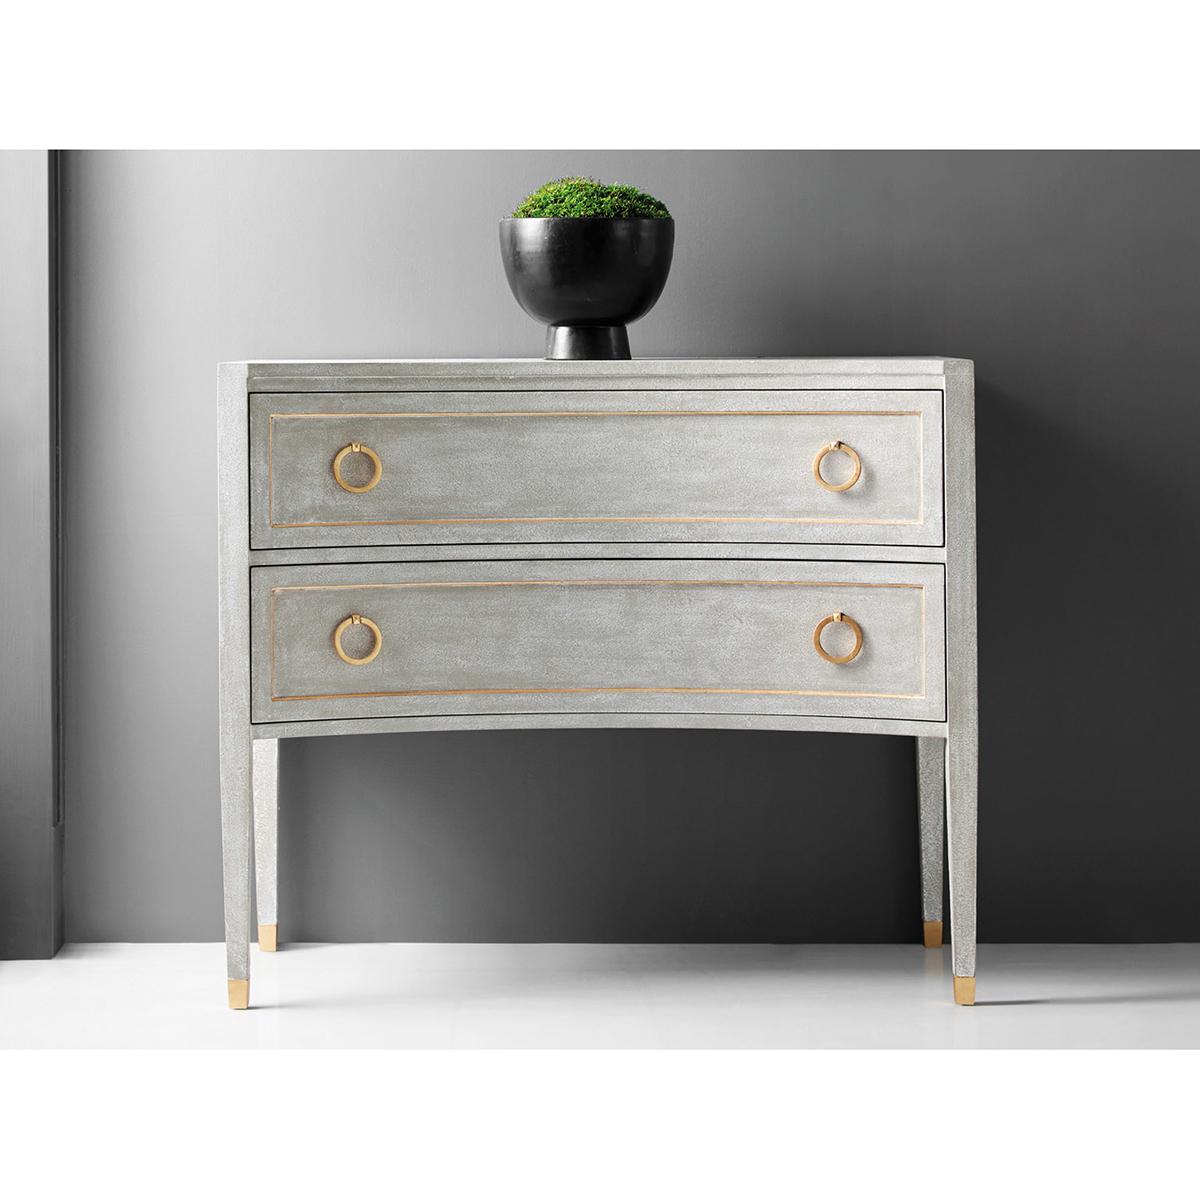 Gustavian Grey Painted Dresser, The Swedish Neo Classic style Gustavian commode with a concave front side, with paneled drawers and sides having gold leaf trim details. The two long drawers with brass ring pull hardware, raised on tapered legs and